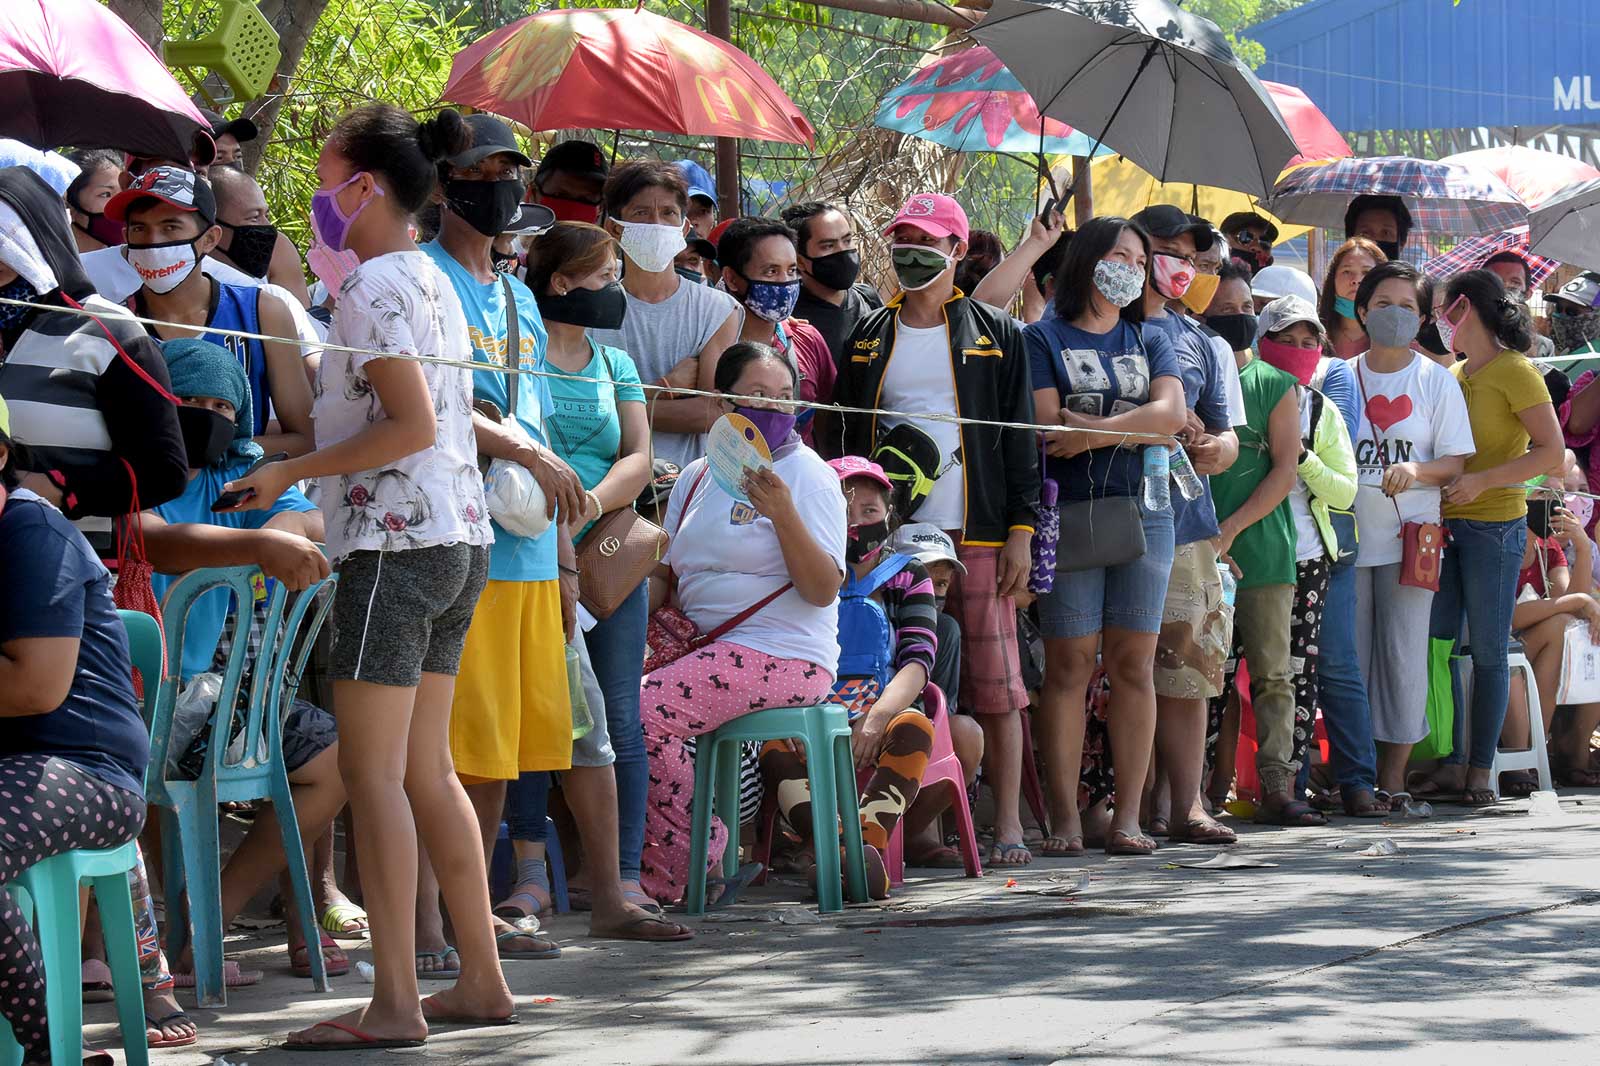 WAITING IN LINE. Residents of Barangay San Jose in Rodriguez, Rizal, queue for emergency subsidy on May 12, 2020. Photo by Angie de Silva/Rappler 